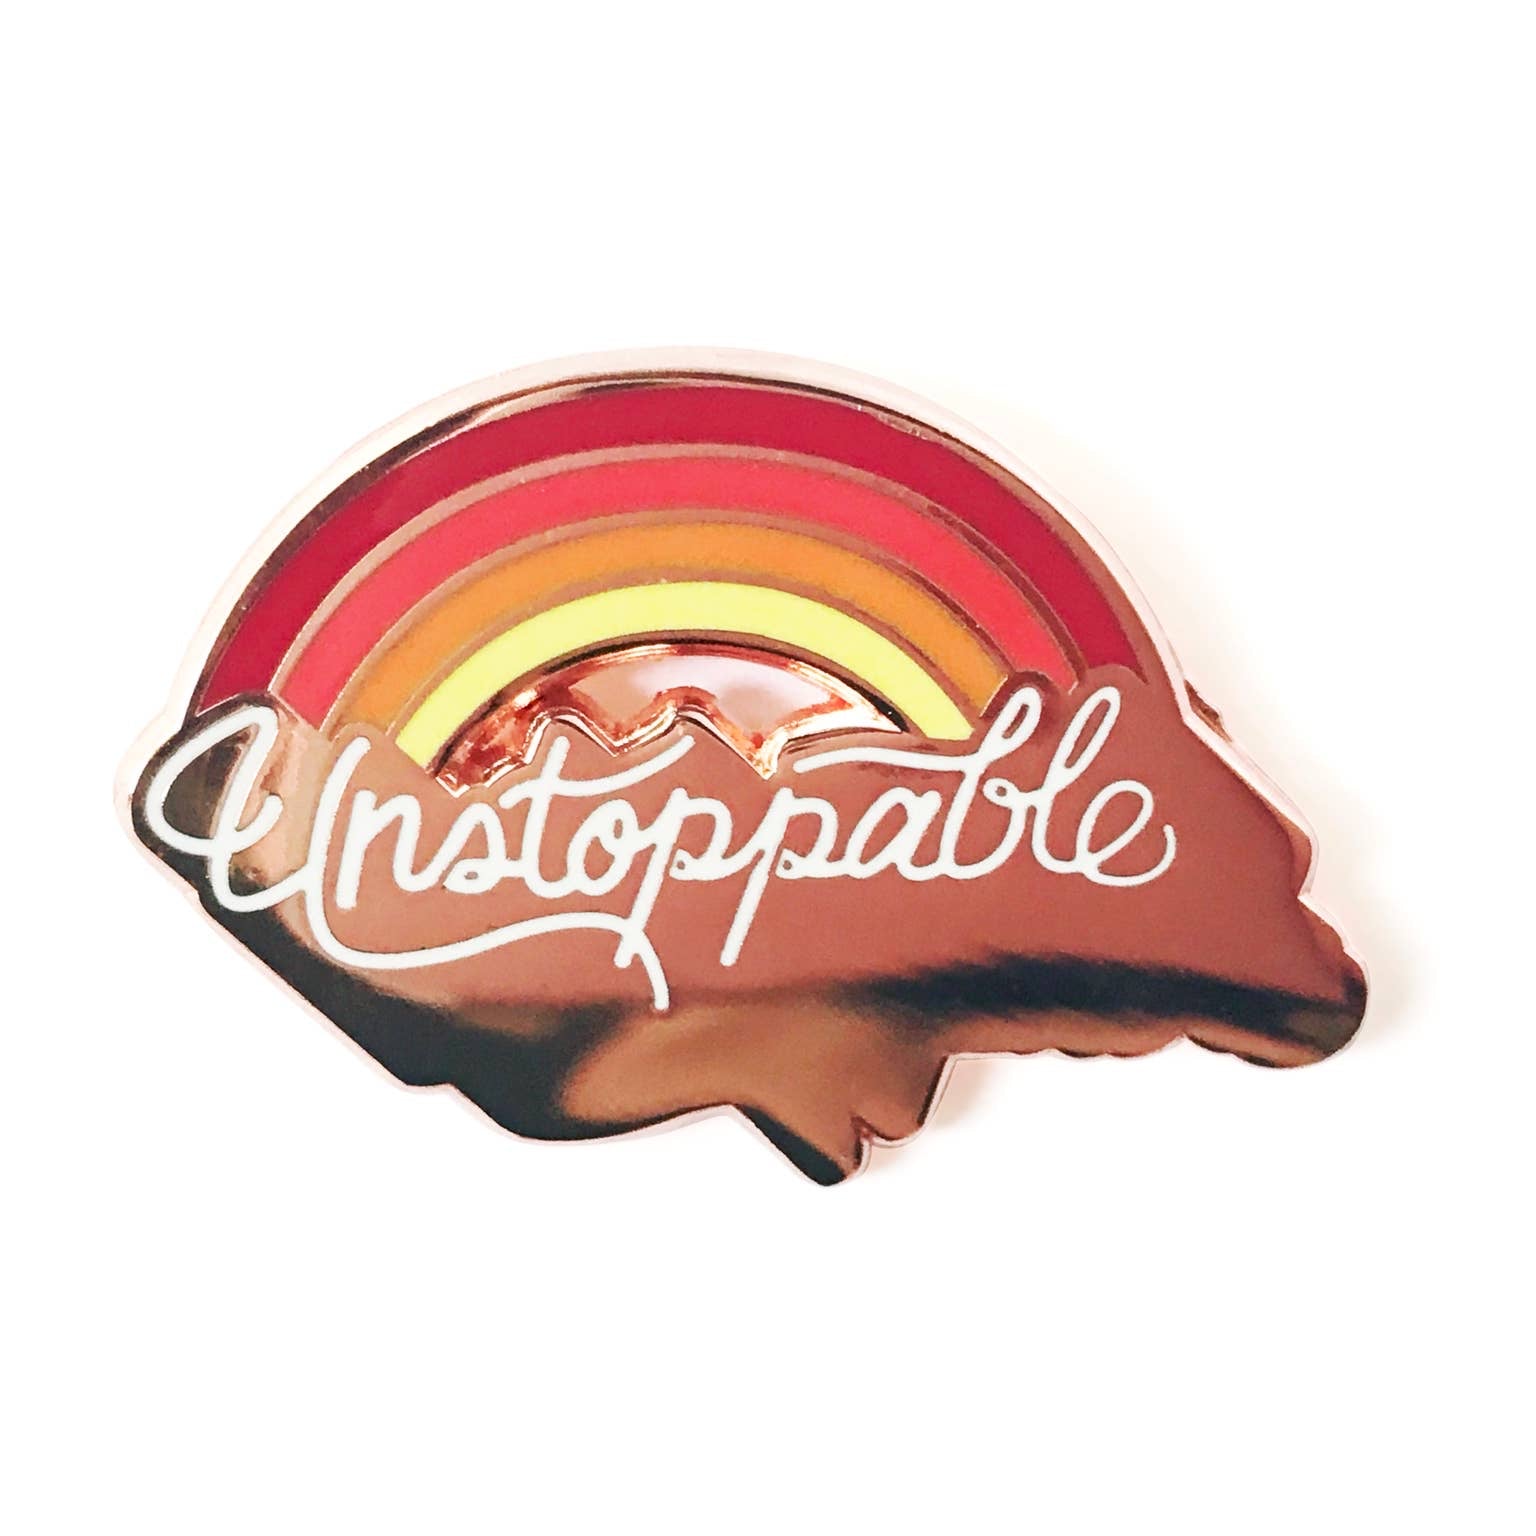 Unstoppable Pin